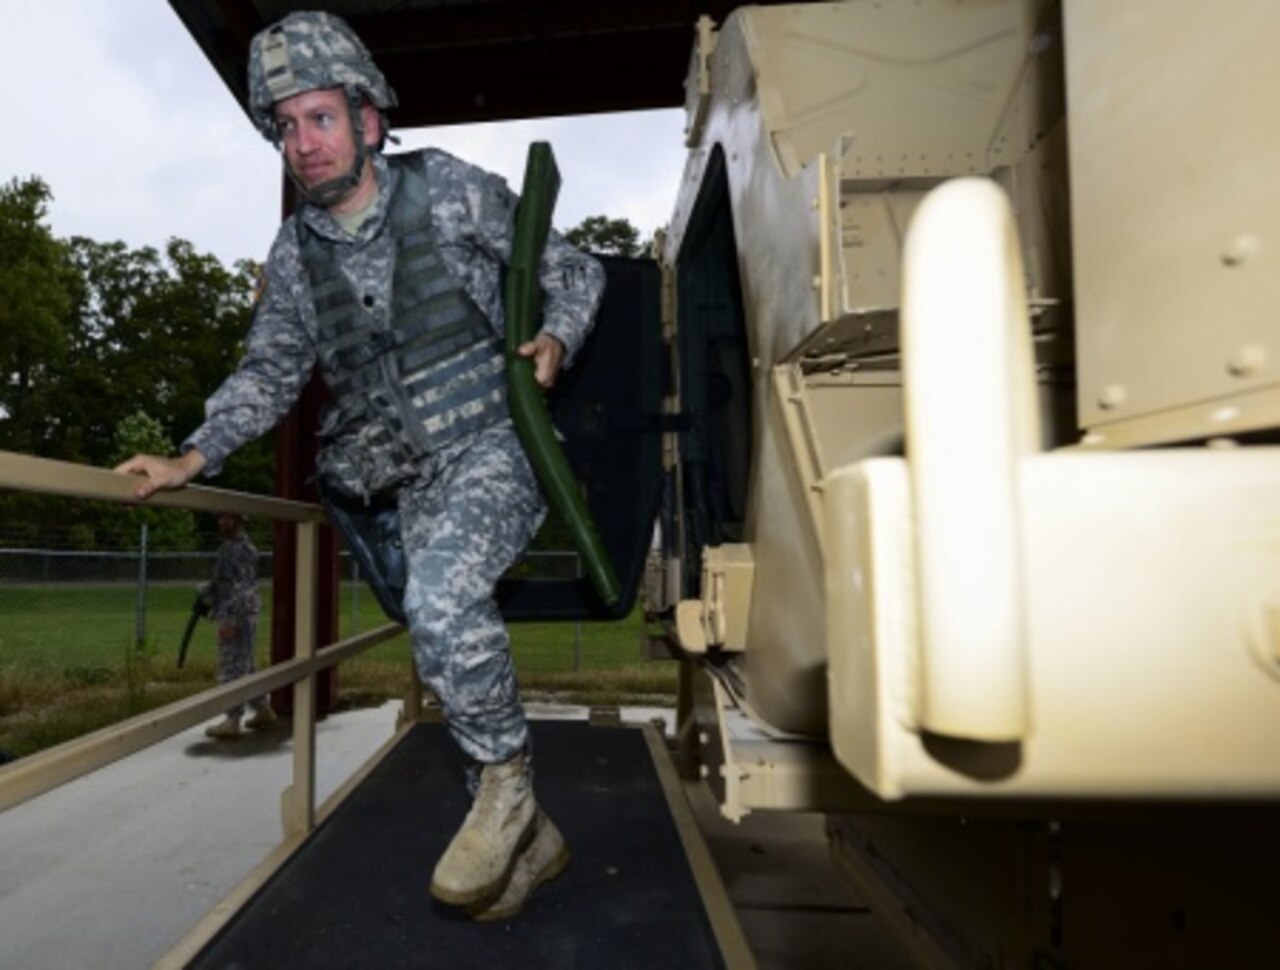 U.S. Army Lt. Col. Kevin Baird, 53rd Transportation Battalion movement control commander, participates in a vehicle rollover exercise at Fort Eustis, Va., Oct. 15, 2014. The rollover training was conducted to ensure soldiers can properly and safely exit an overturned vehicle during a deployment. U.S. Air Force photo by Senior Airman Kayla Newman